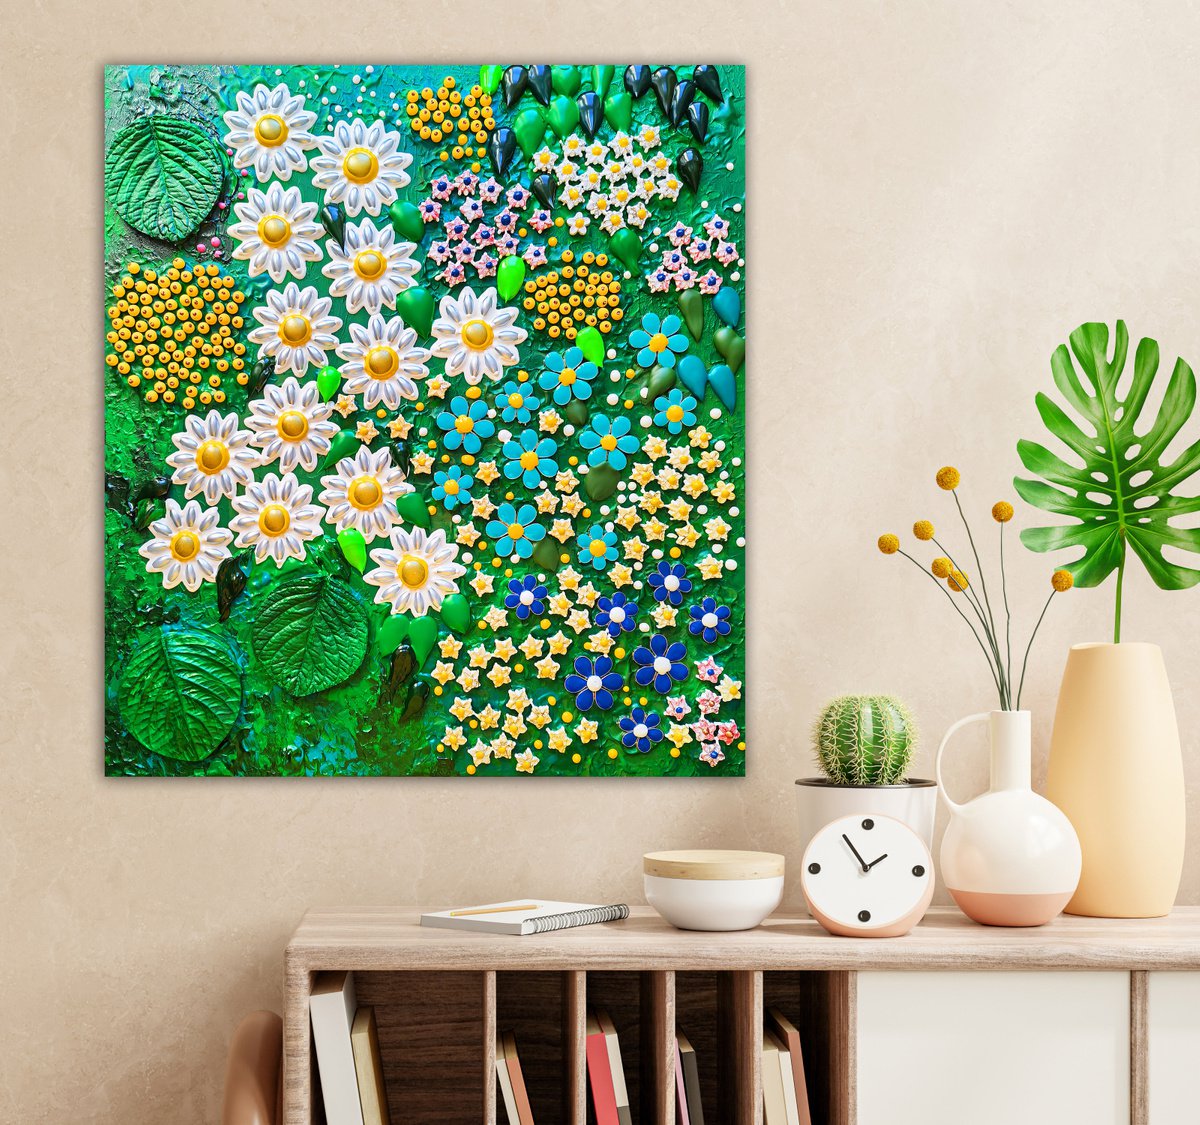 Daisies and forget-me-nots in colorful summer garden. Flowers bas-relief, mosaic by BAST